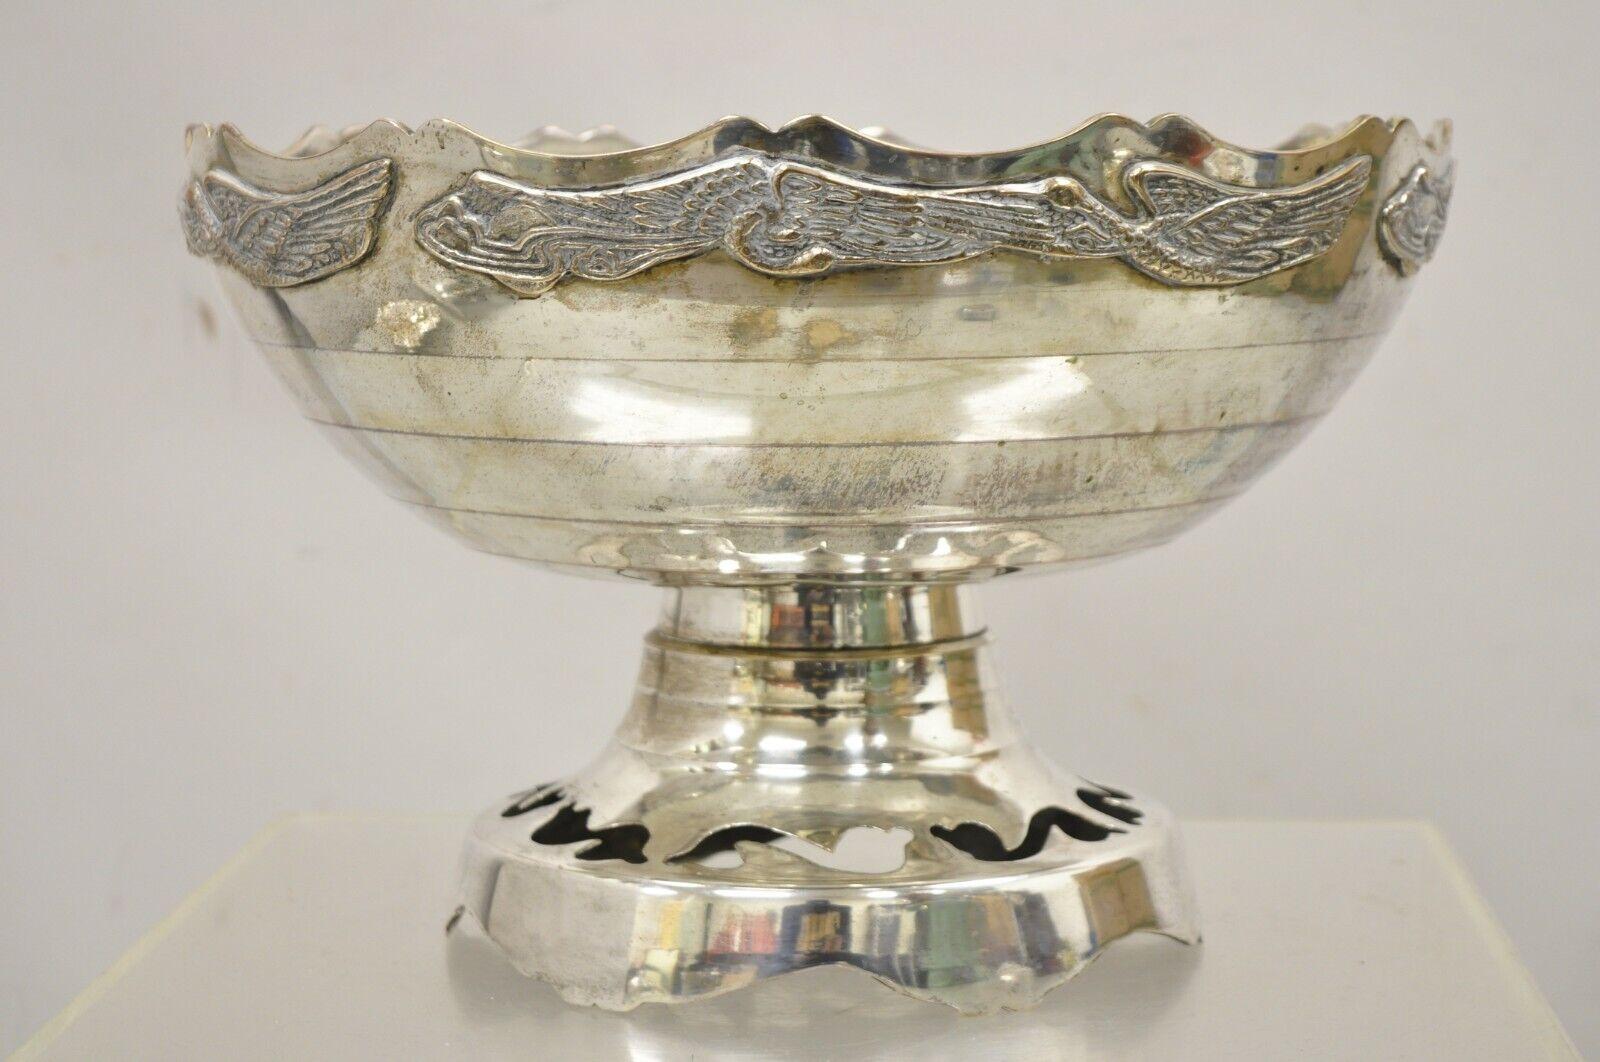 Vintage Silver Plated Art Deco Style Punch Bowl with Repeating Crane Birds. Item features birds to upper rim, raised pedestal base with perforated design, very nice vintage item, great style and form, marked 